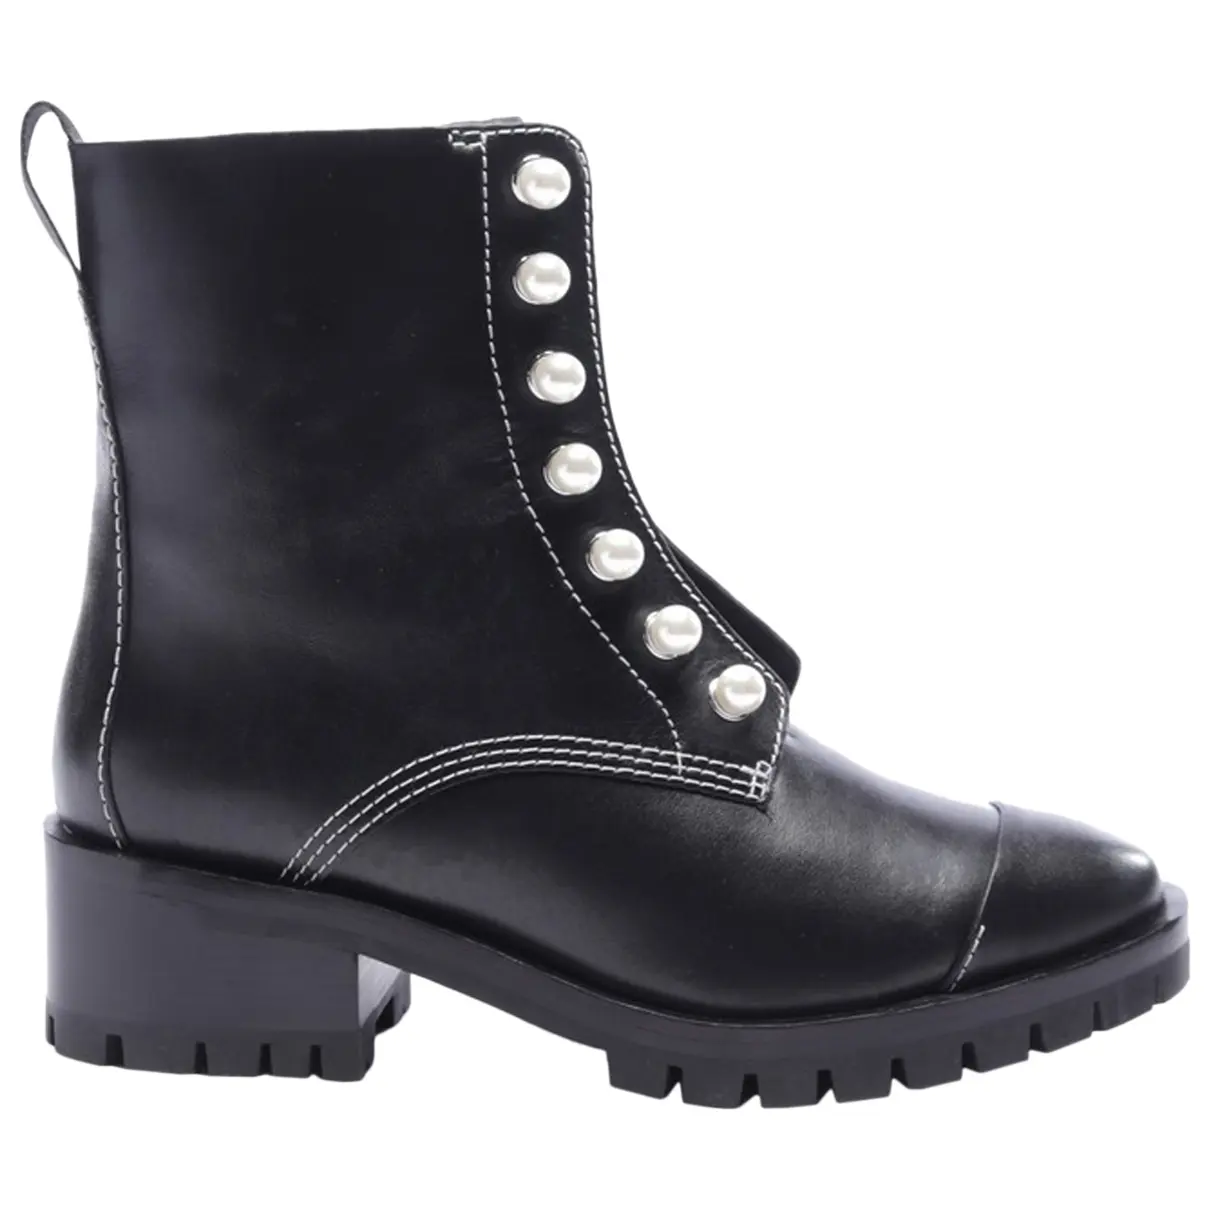 Leather ankle boots 3.1 Phillip Lim